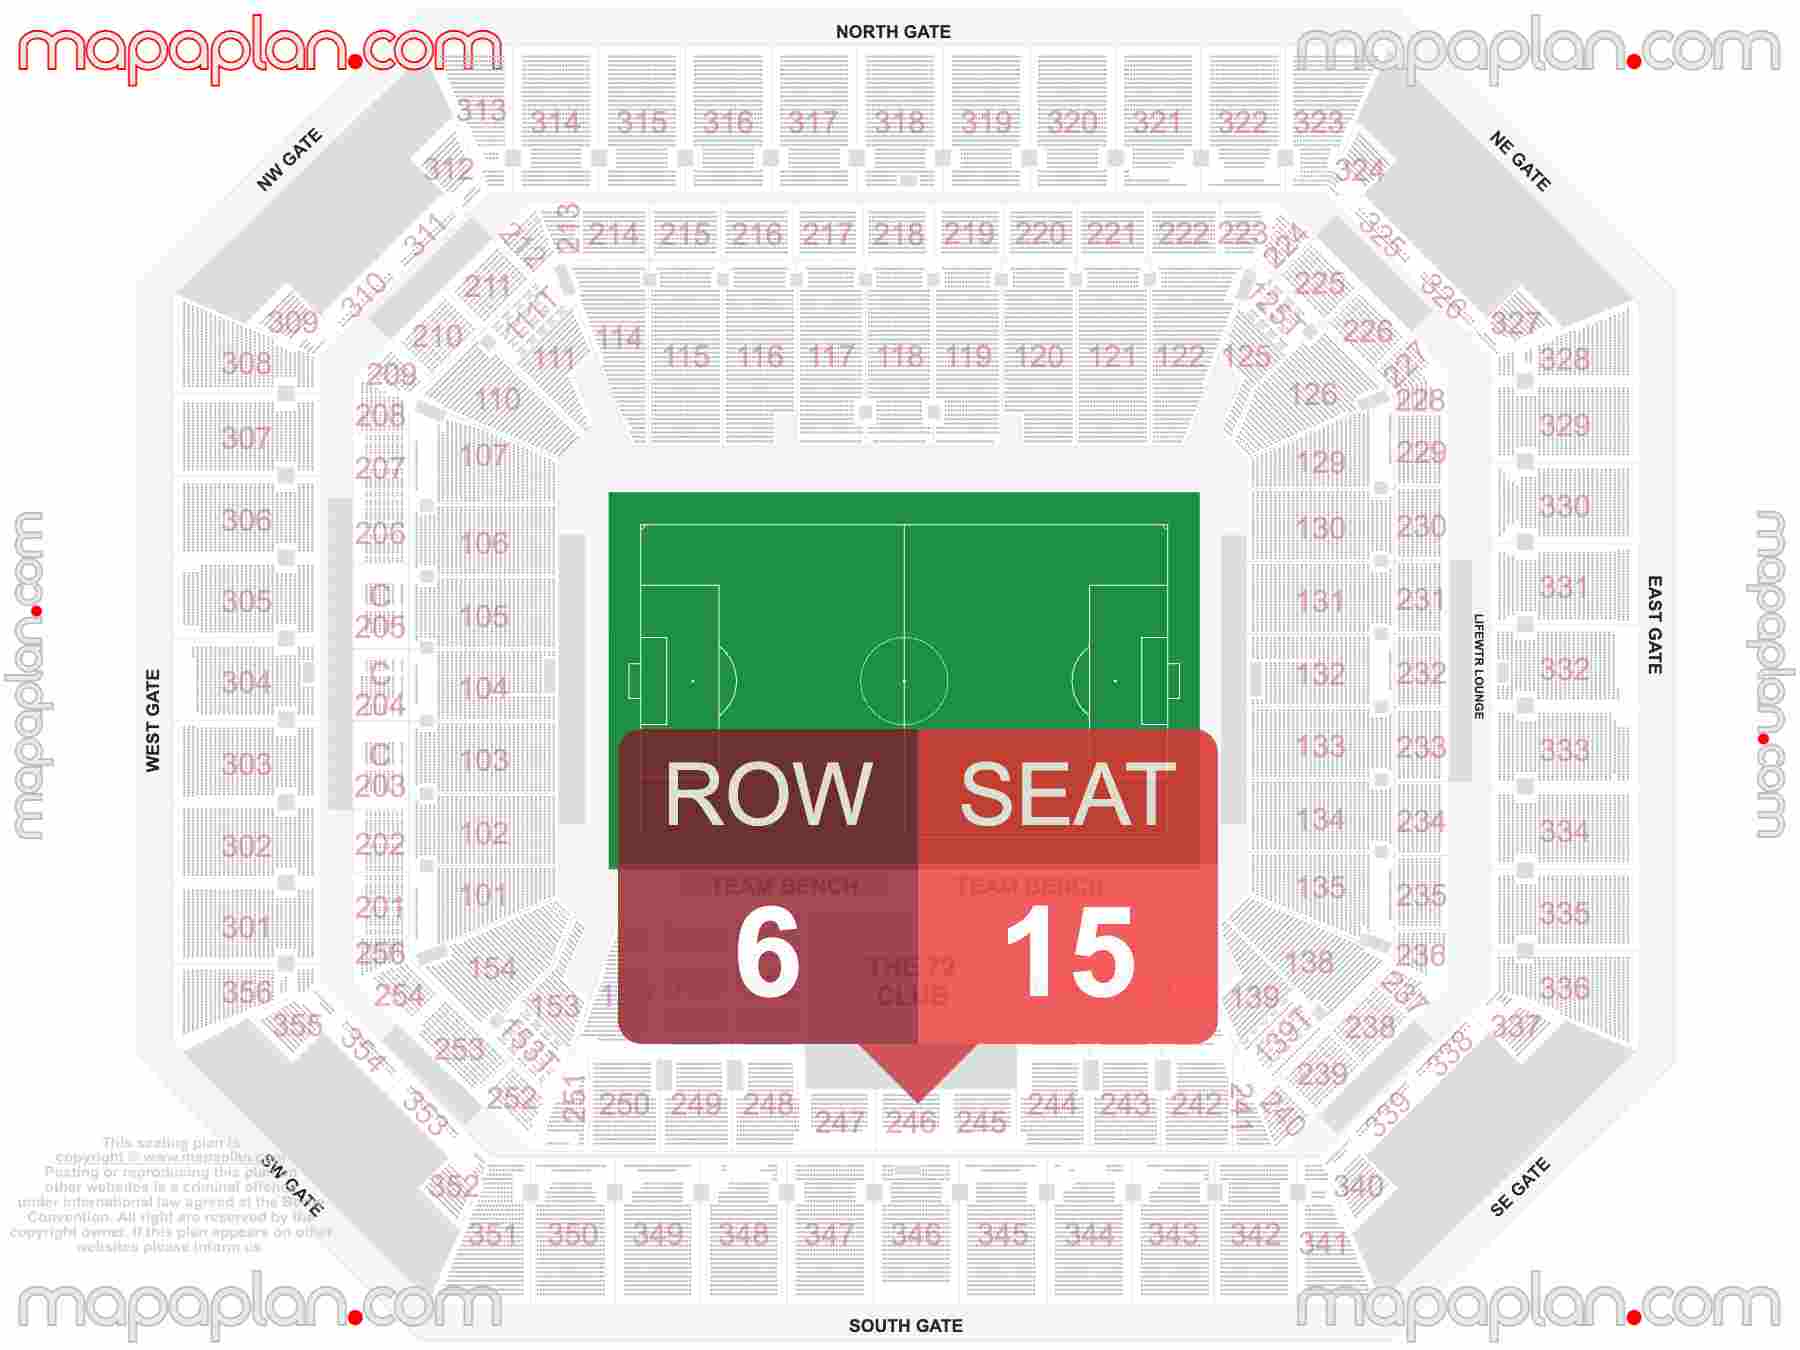 Miami Hard Rock Stadium seating chart Soccer seating chart with exact section numbers showing best rows and seats selection 3d layout - Best interactive seat finder tool with precise detailed location data